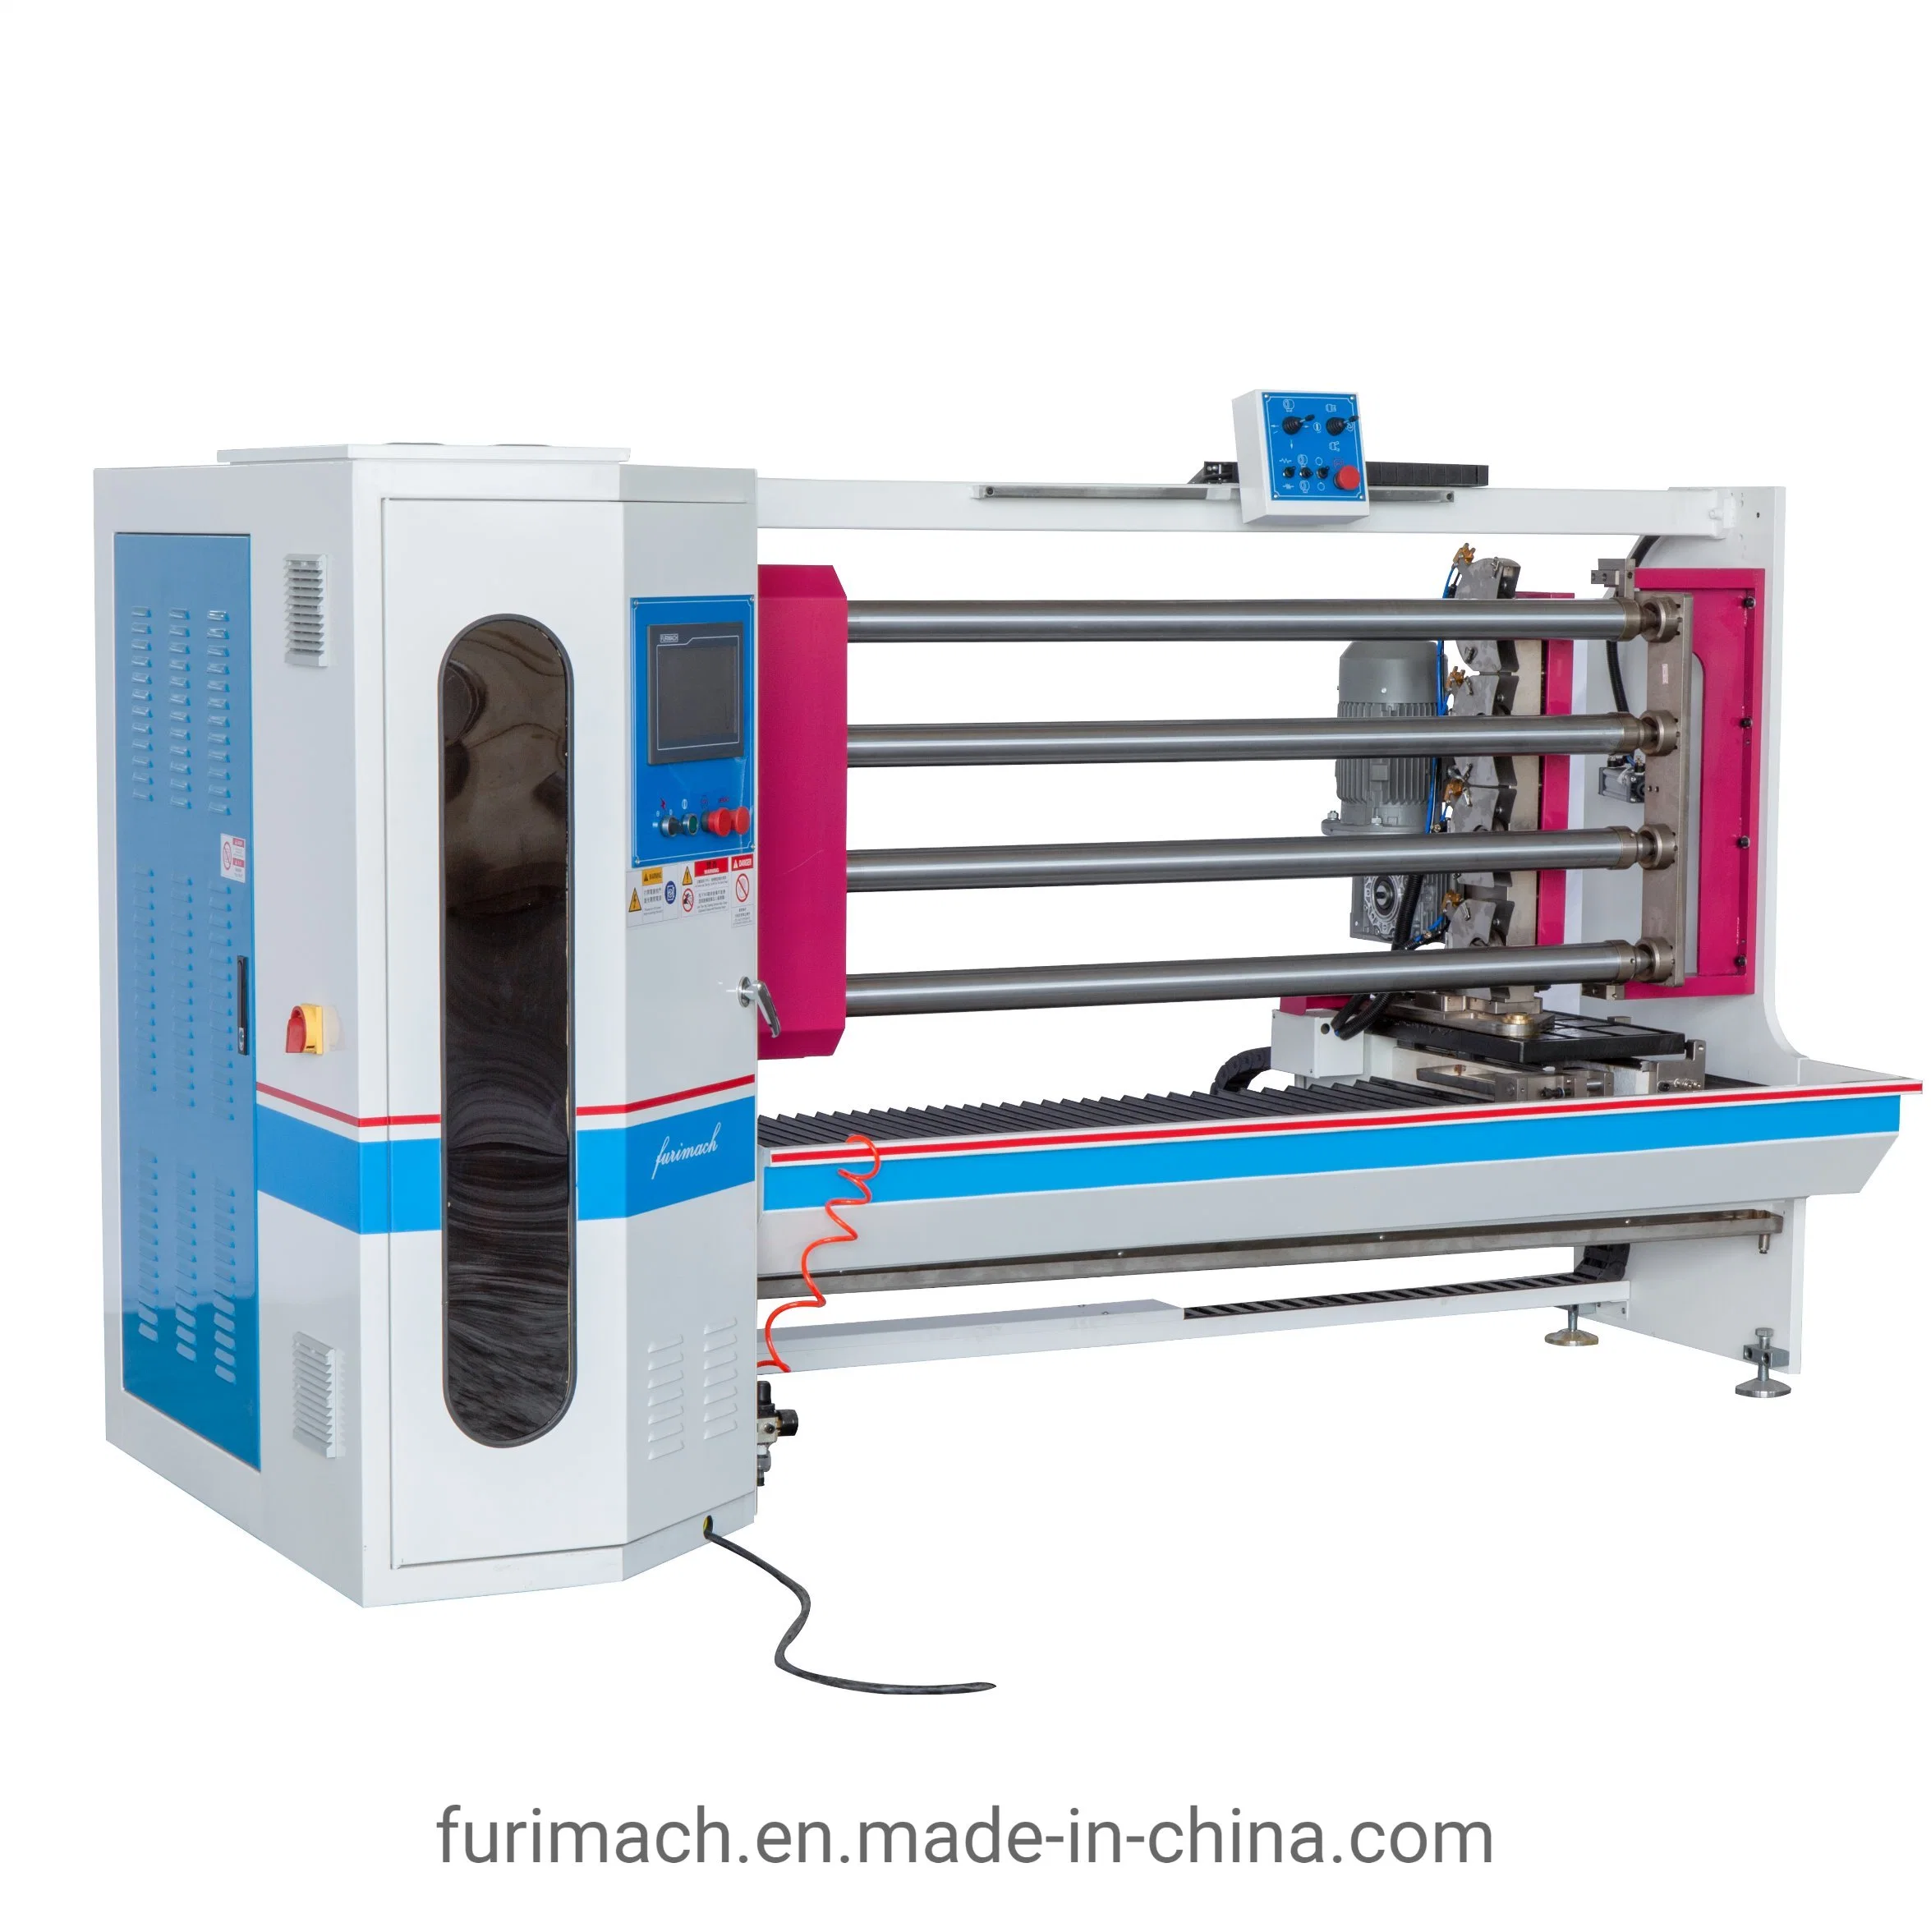 Duct Tape Four Shafts Automatic Cutting Machine